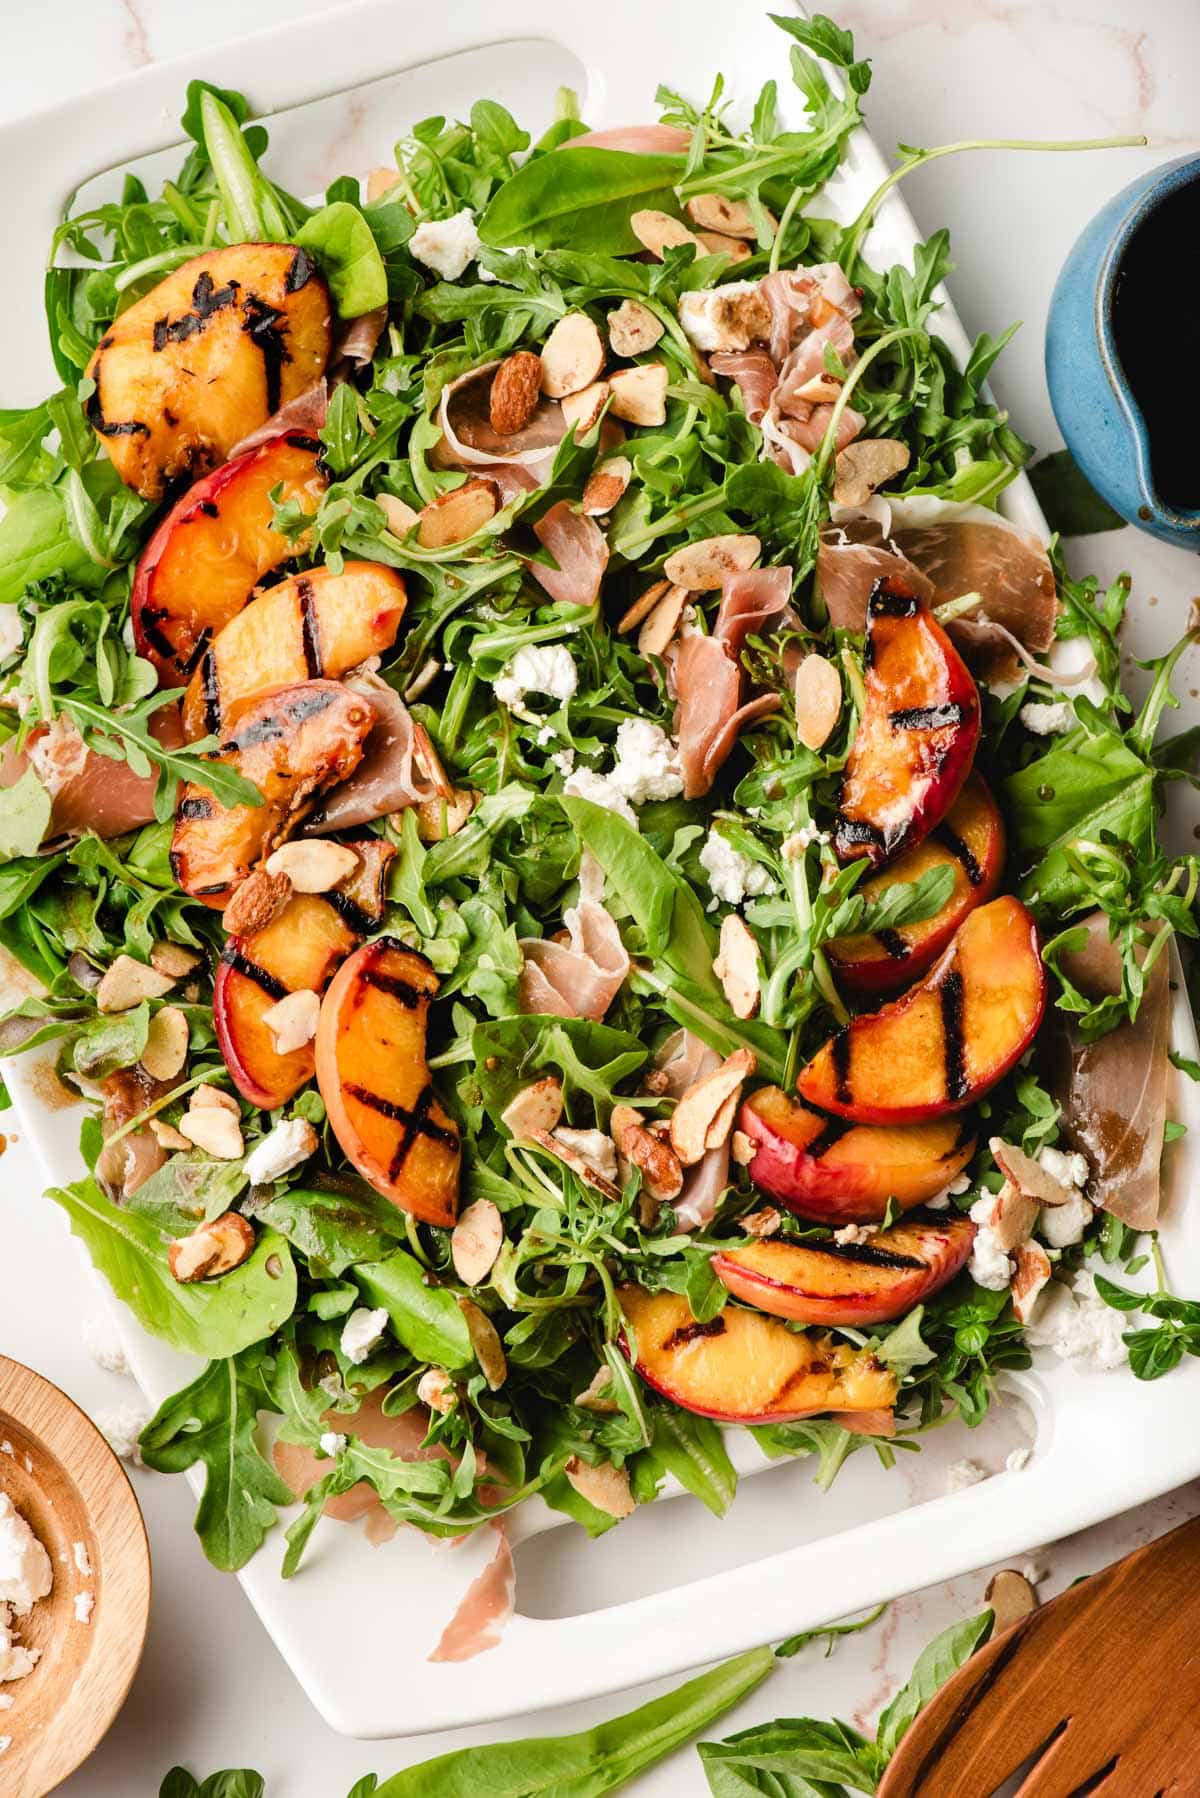 Bit platter of Grilled Peach Salad with prosciutto, goat cheese, and almonds.